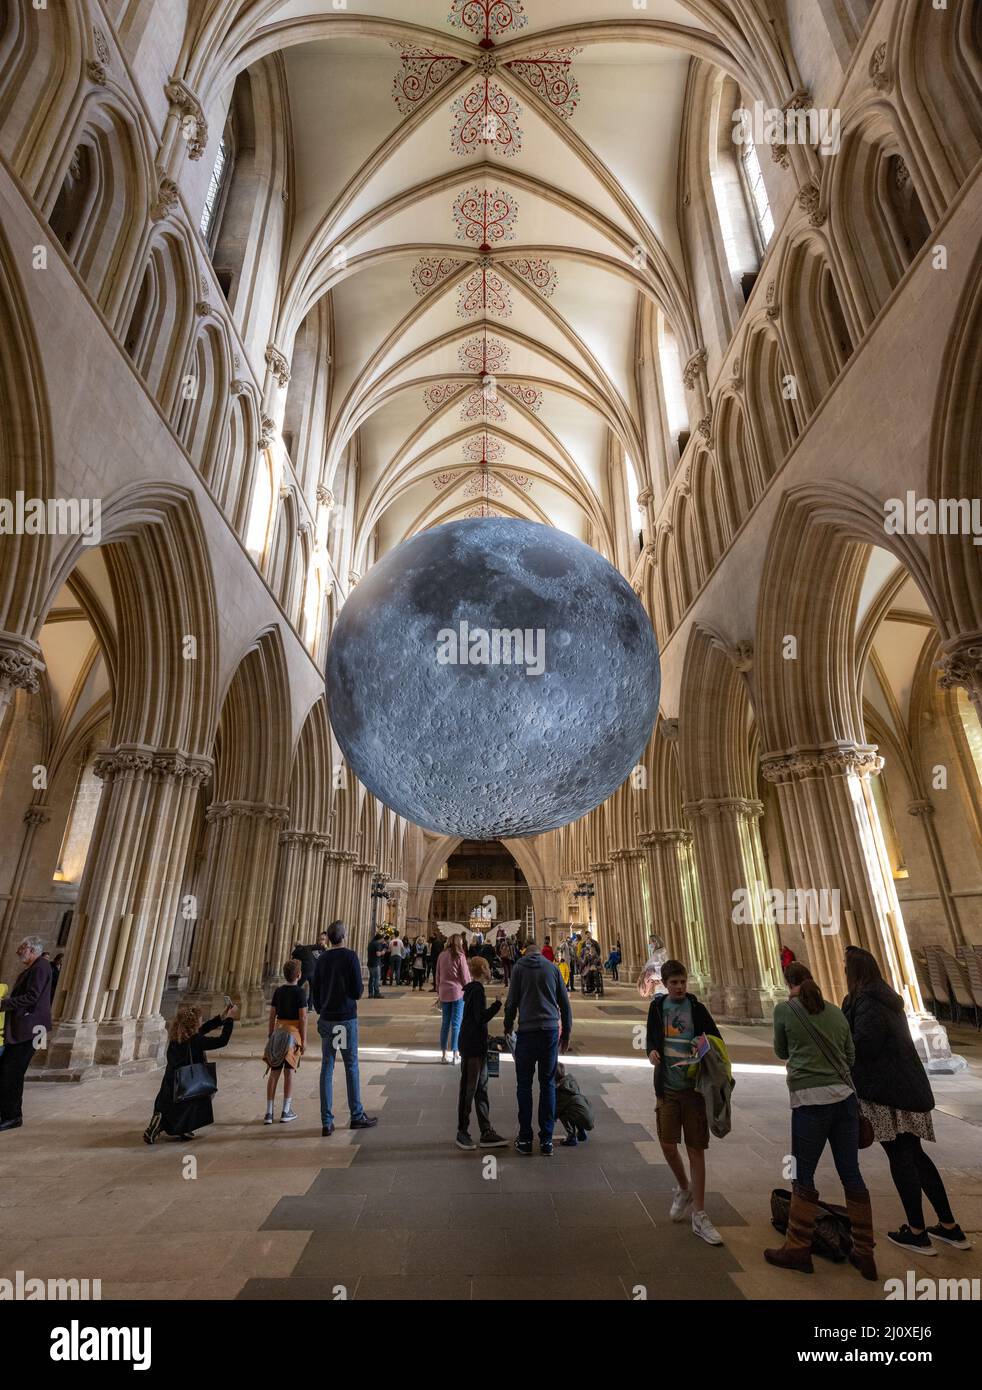 A seven-metre wide sculpture by Luke Jerram of the moon on display inside Wells Cathedral, Wells, Somerset, UK Stock Photo